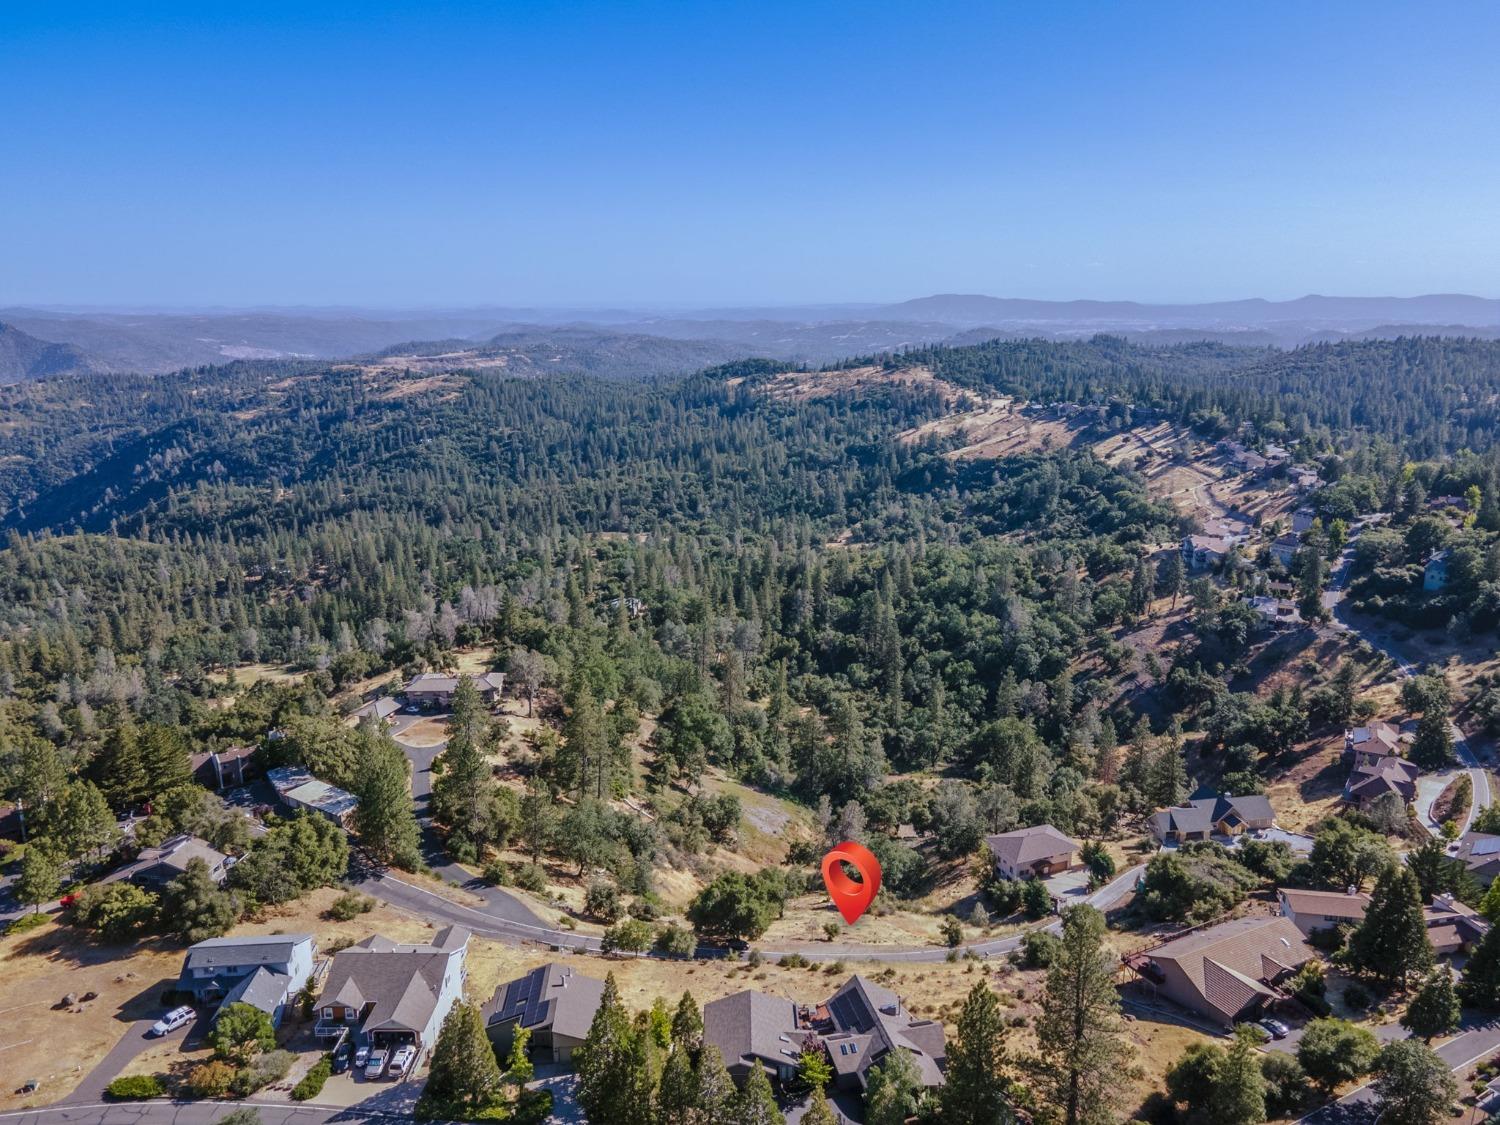 Views and location! This oversized 1.08 acre lot features stunning views of the Stanislaus Valley River Canyon, is located in the gated community of Forest Meadows (just minutes from downtown Murphys, wineries...or a short drive to skiing, hiking or boating) and is within walking distance to Hilltop Park amenities. FMOA amenities include: buried utilities, public water/sewer, security gate/patrols, clubhouse, two parks, pools, tennis/pickleball/bocce courts, playgrounds, dog park, trails and so much more.